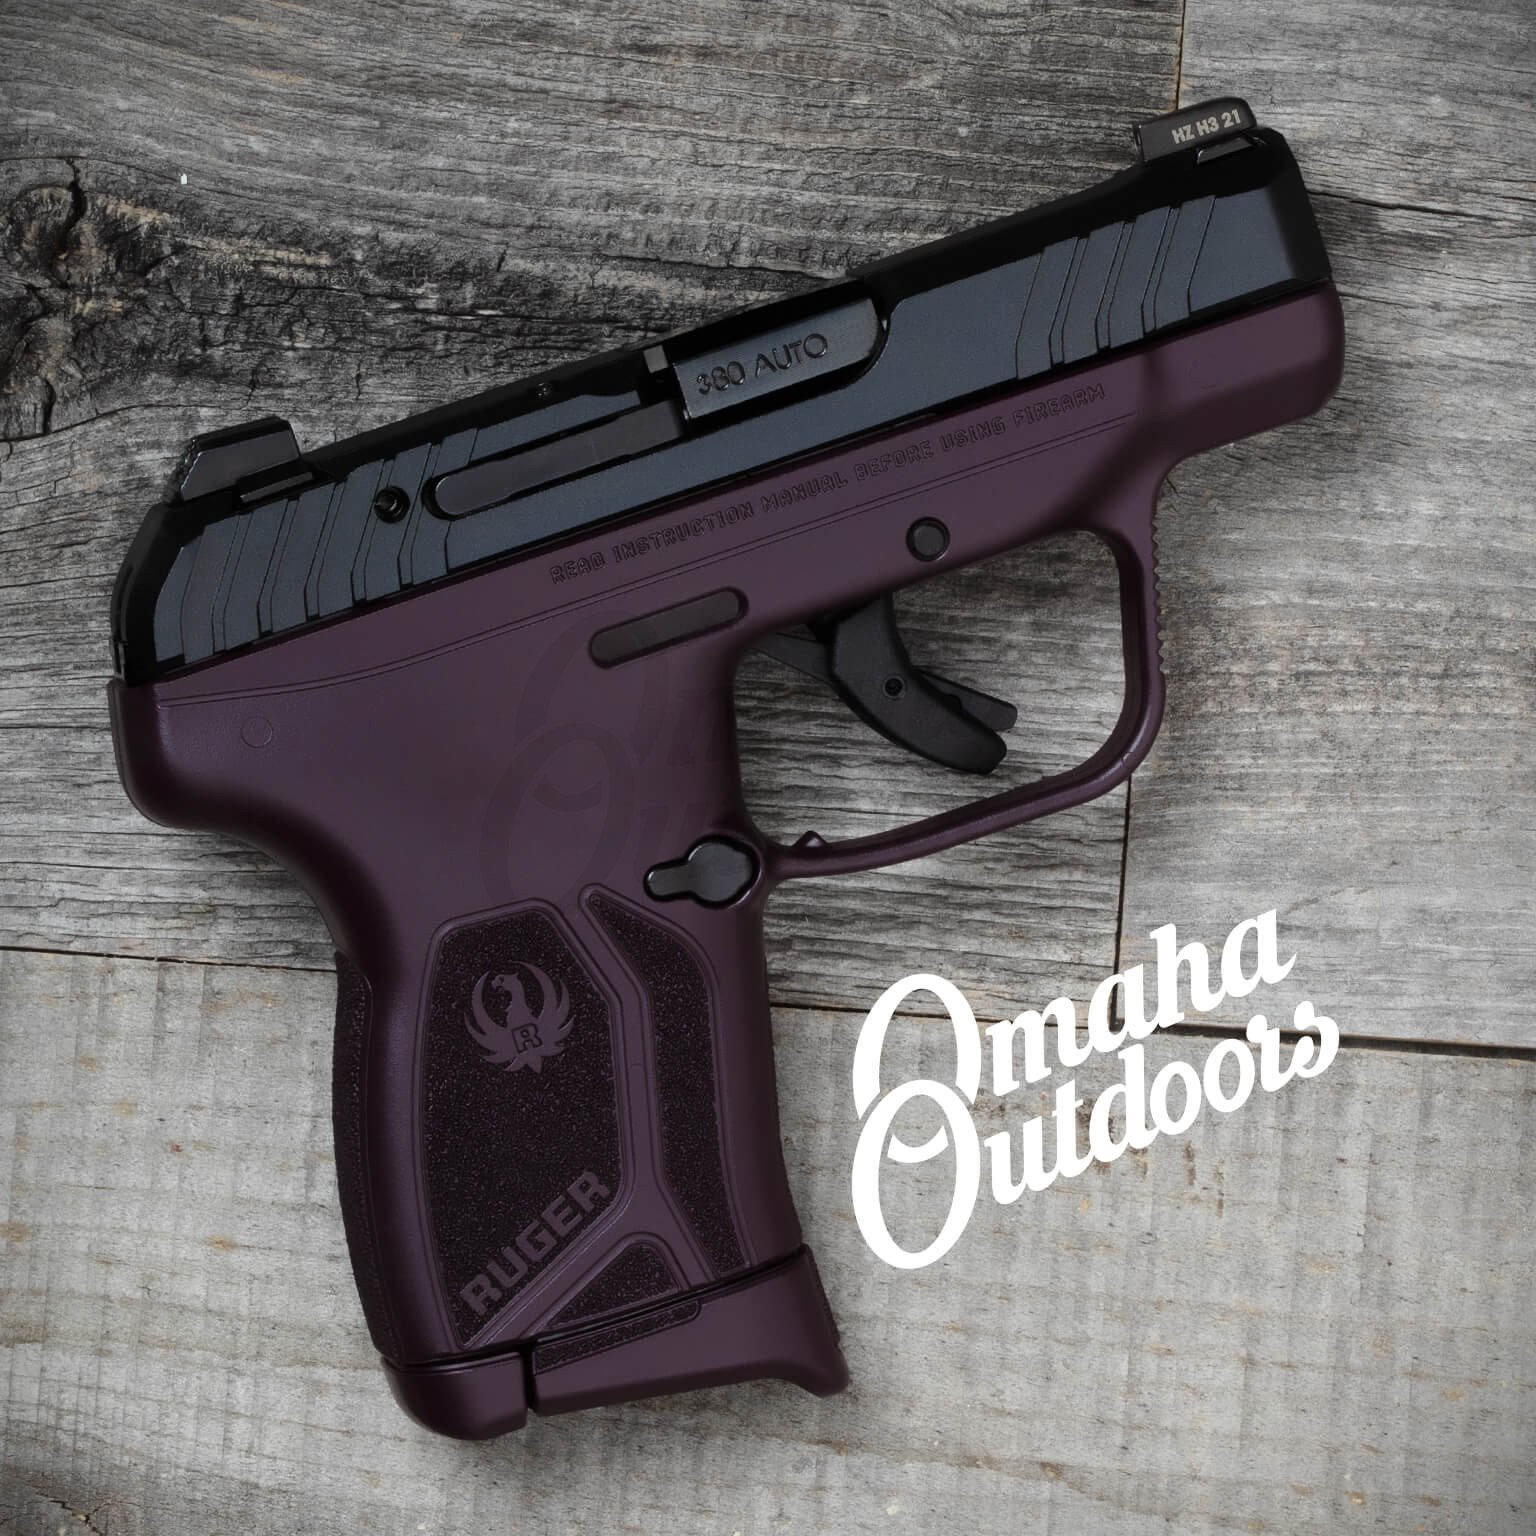 Ruger LCP MAX Plum - Omaha Outdoors